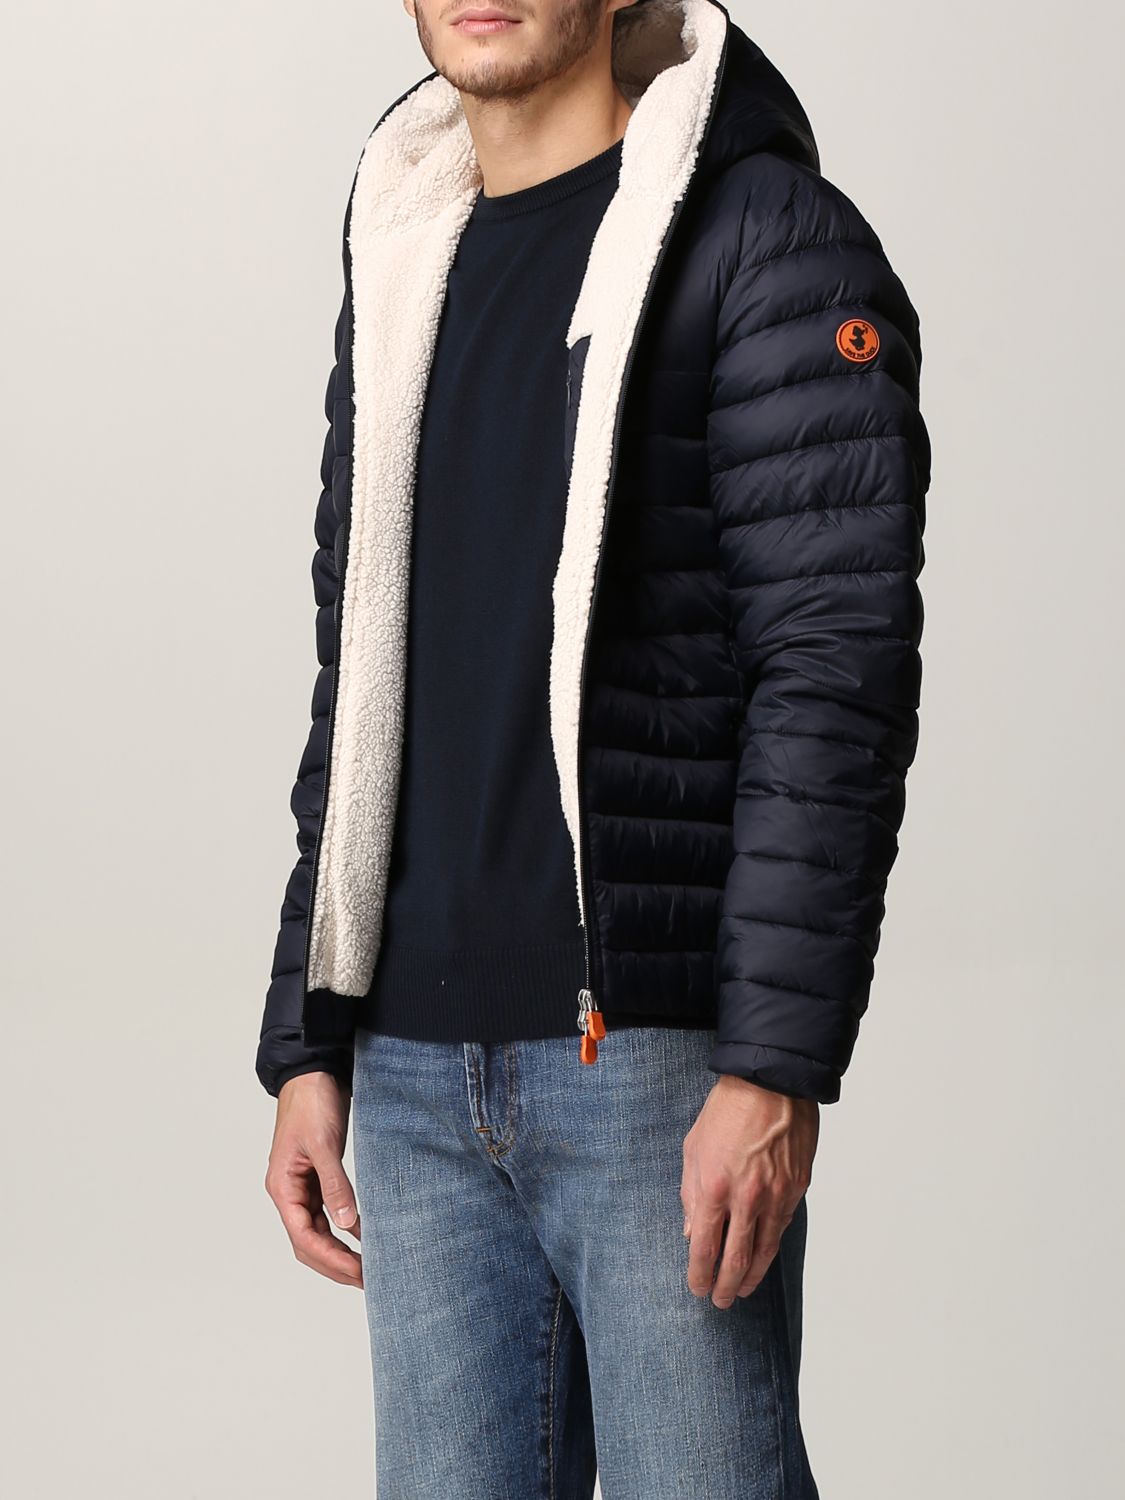 Jacket Save The Duck: Save The Duck jacket for man blue 3